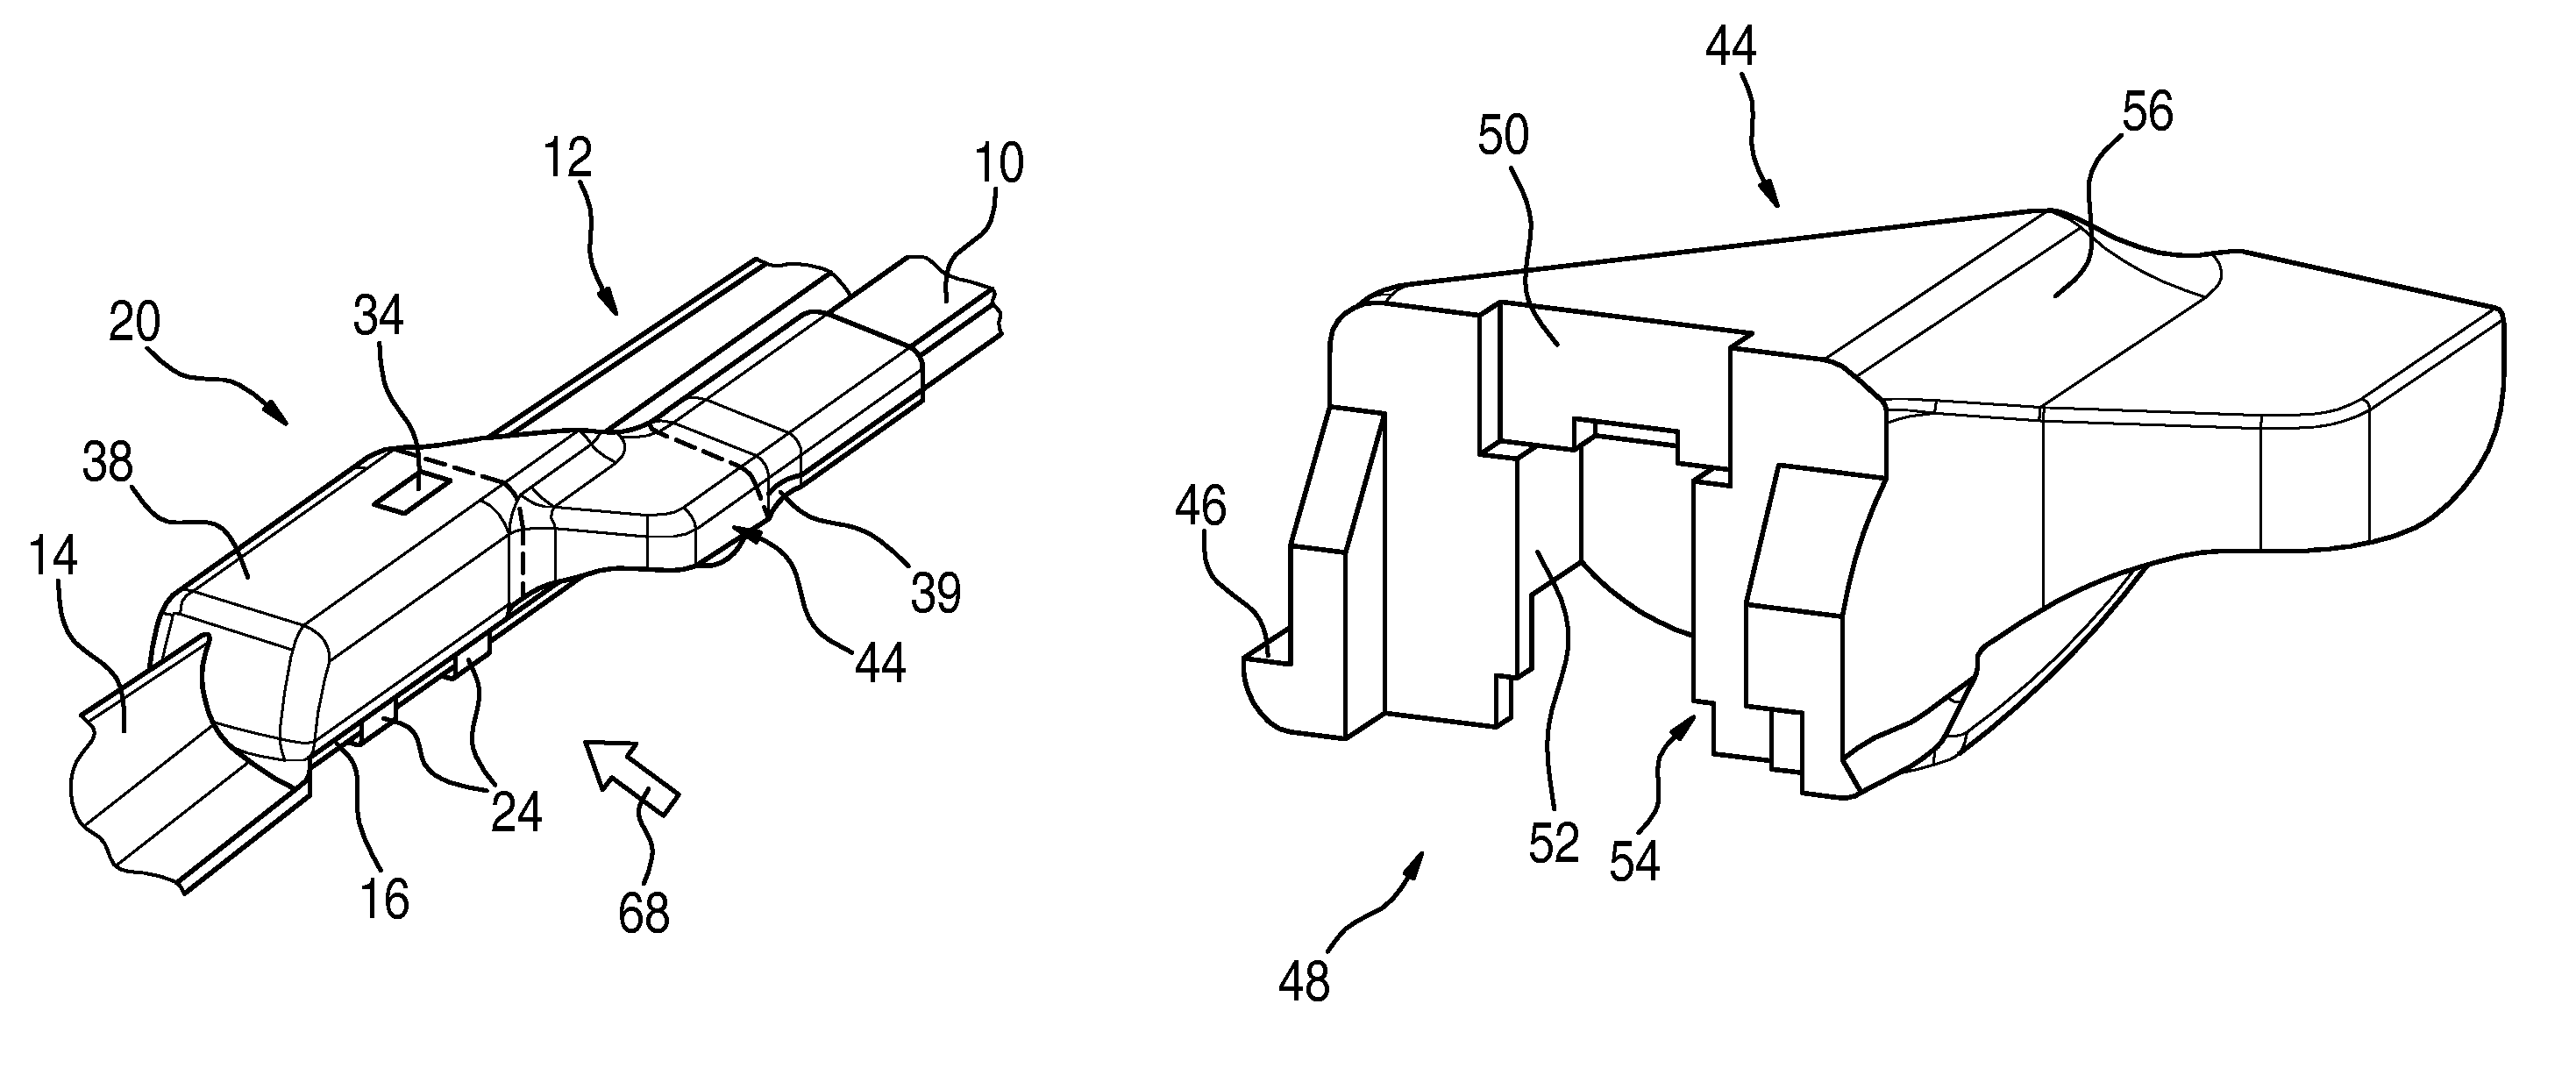 Device for connecting a wiper blade to a wiper arm of a windshield wiper in an articulated manner